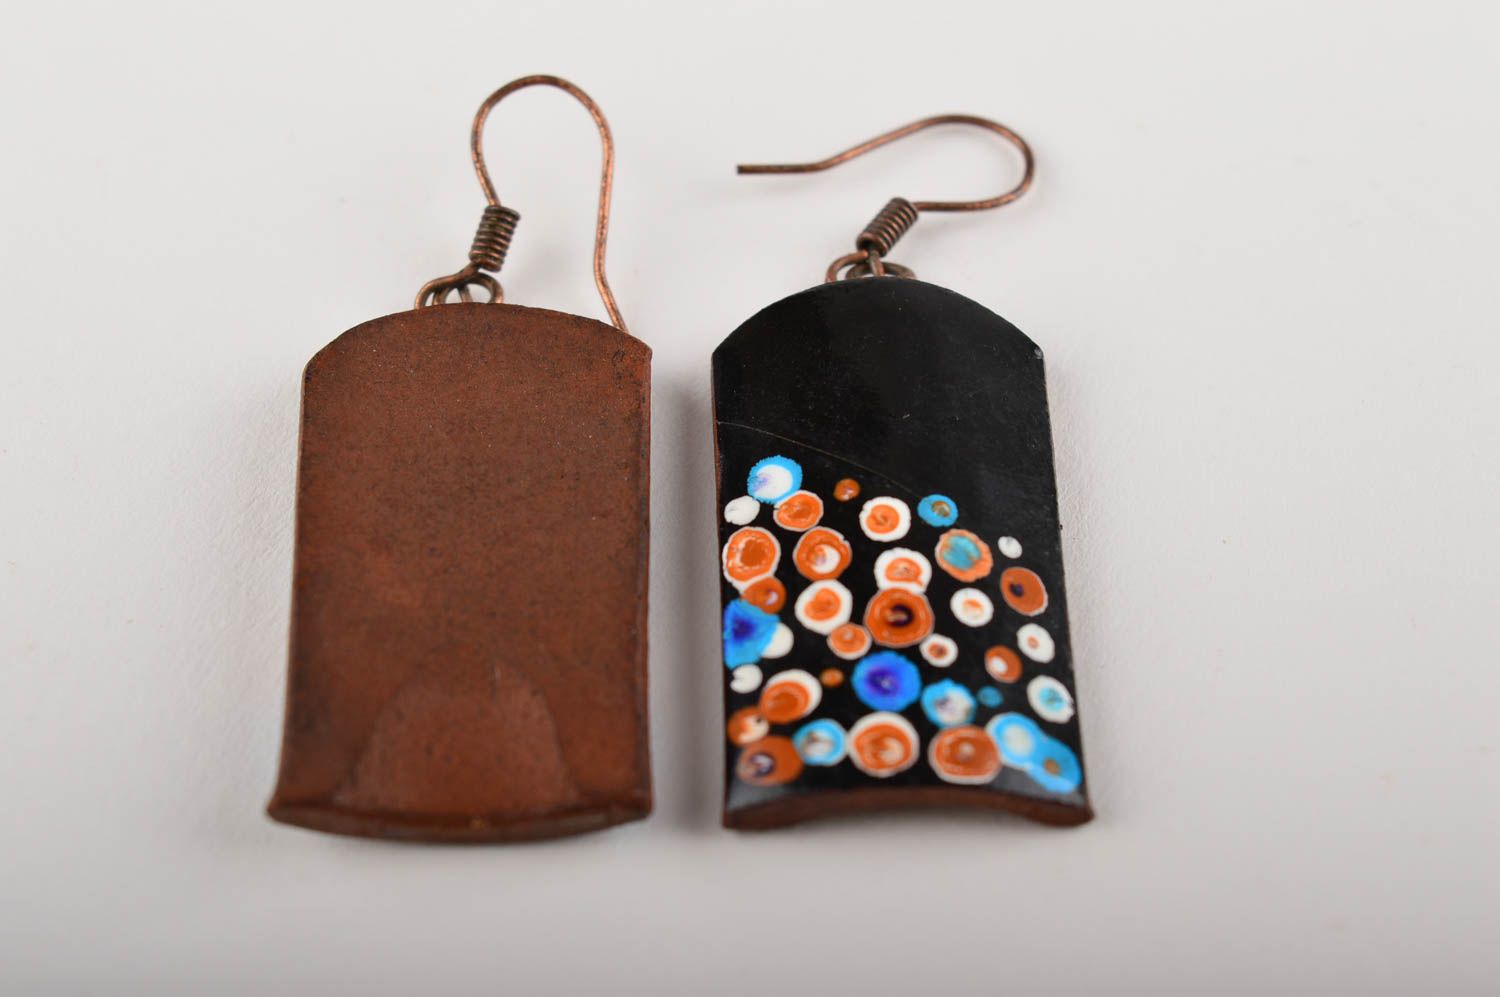 Handmade ceramic earrings fashion earrings designer accessories gifts for her photo 4